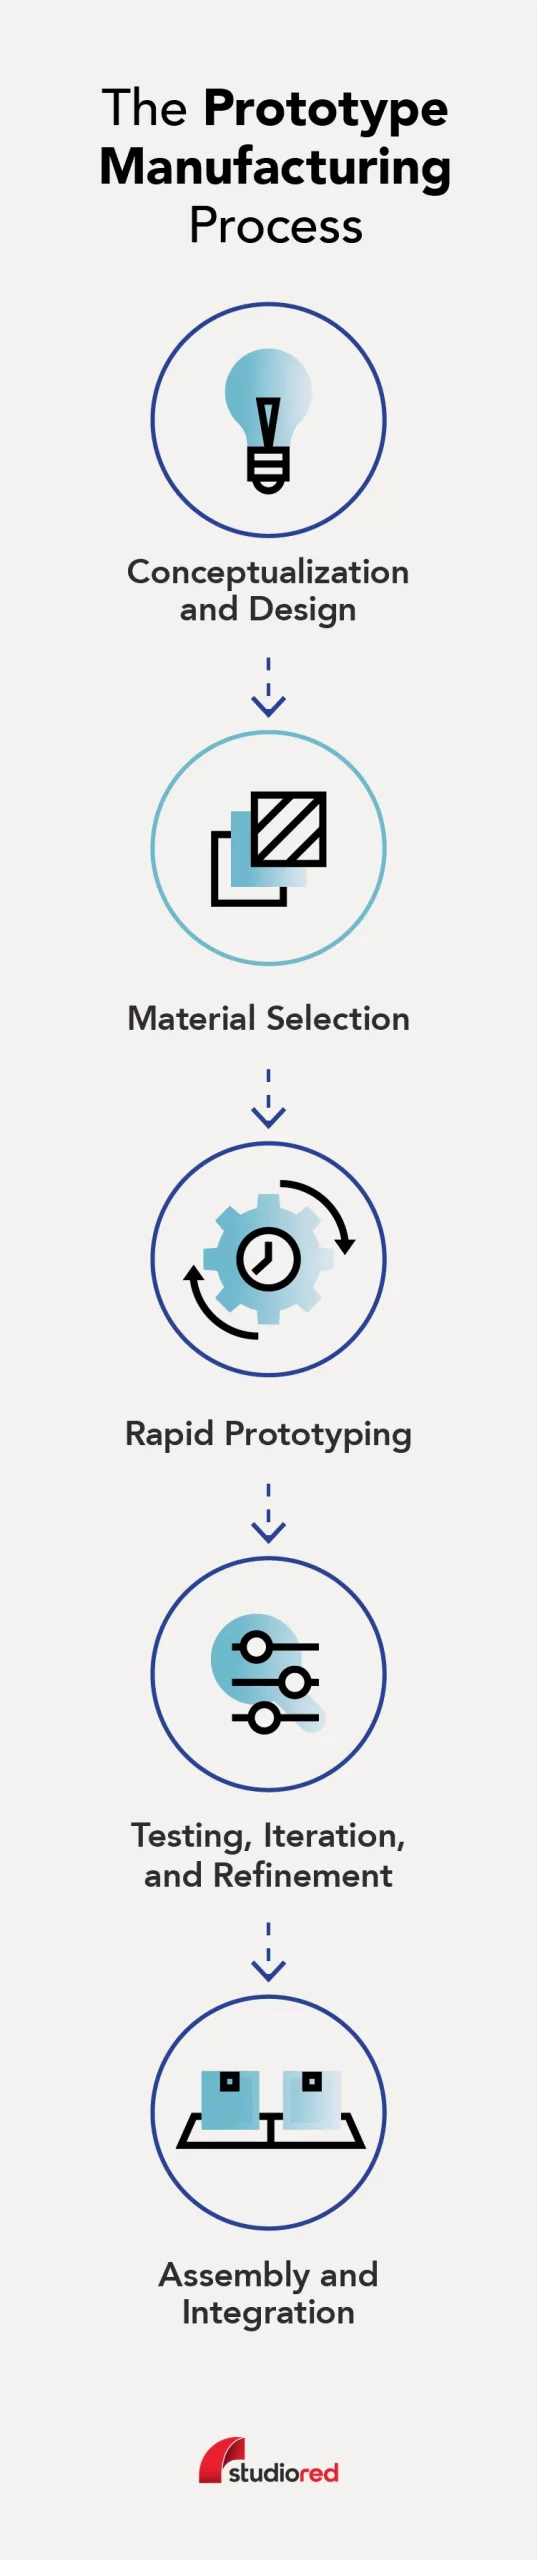 Graphic depicting the prototype manufacturing process with five key steps: Conceptualization and Design, Material Selection, Rapid Prototyping, Testing, Iteration, and Refinement, and Assembly and Integration. Each step is represented by a circular icon connected by dashed lines.